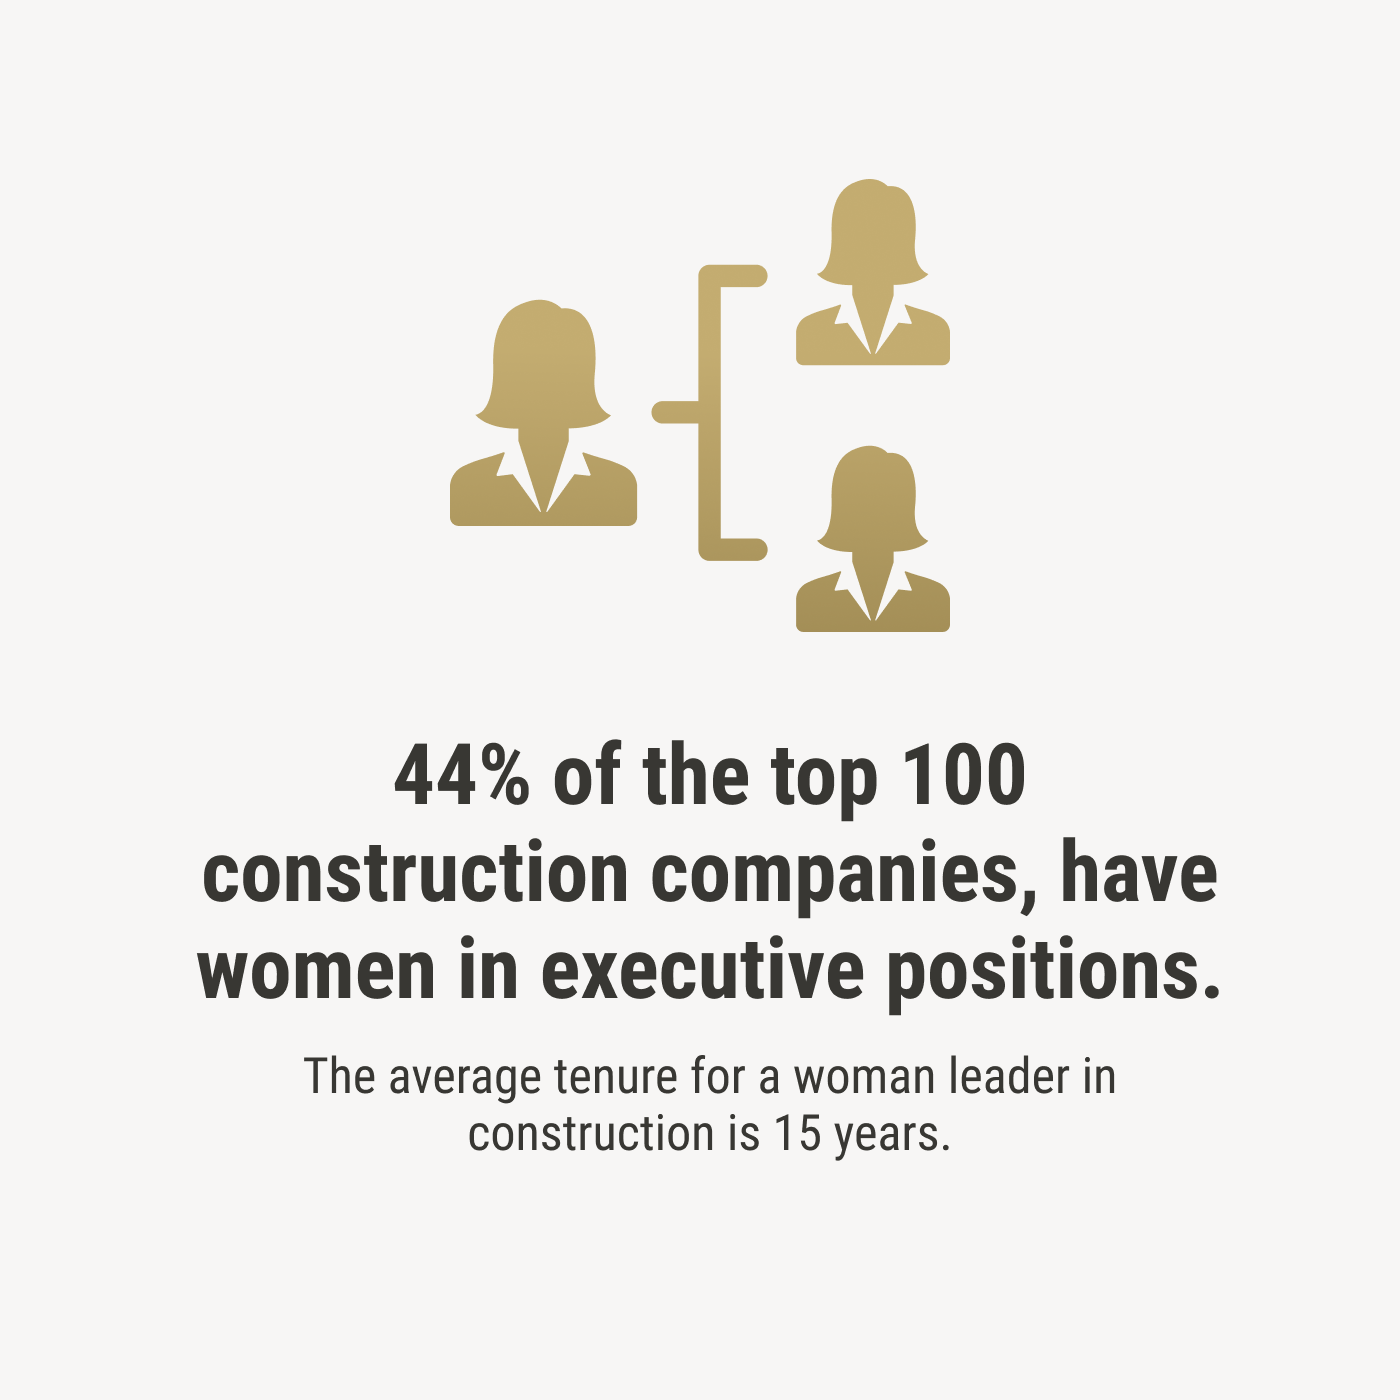 44% of the top 100 construction companies have women in executive position